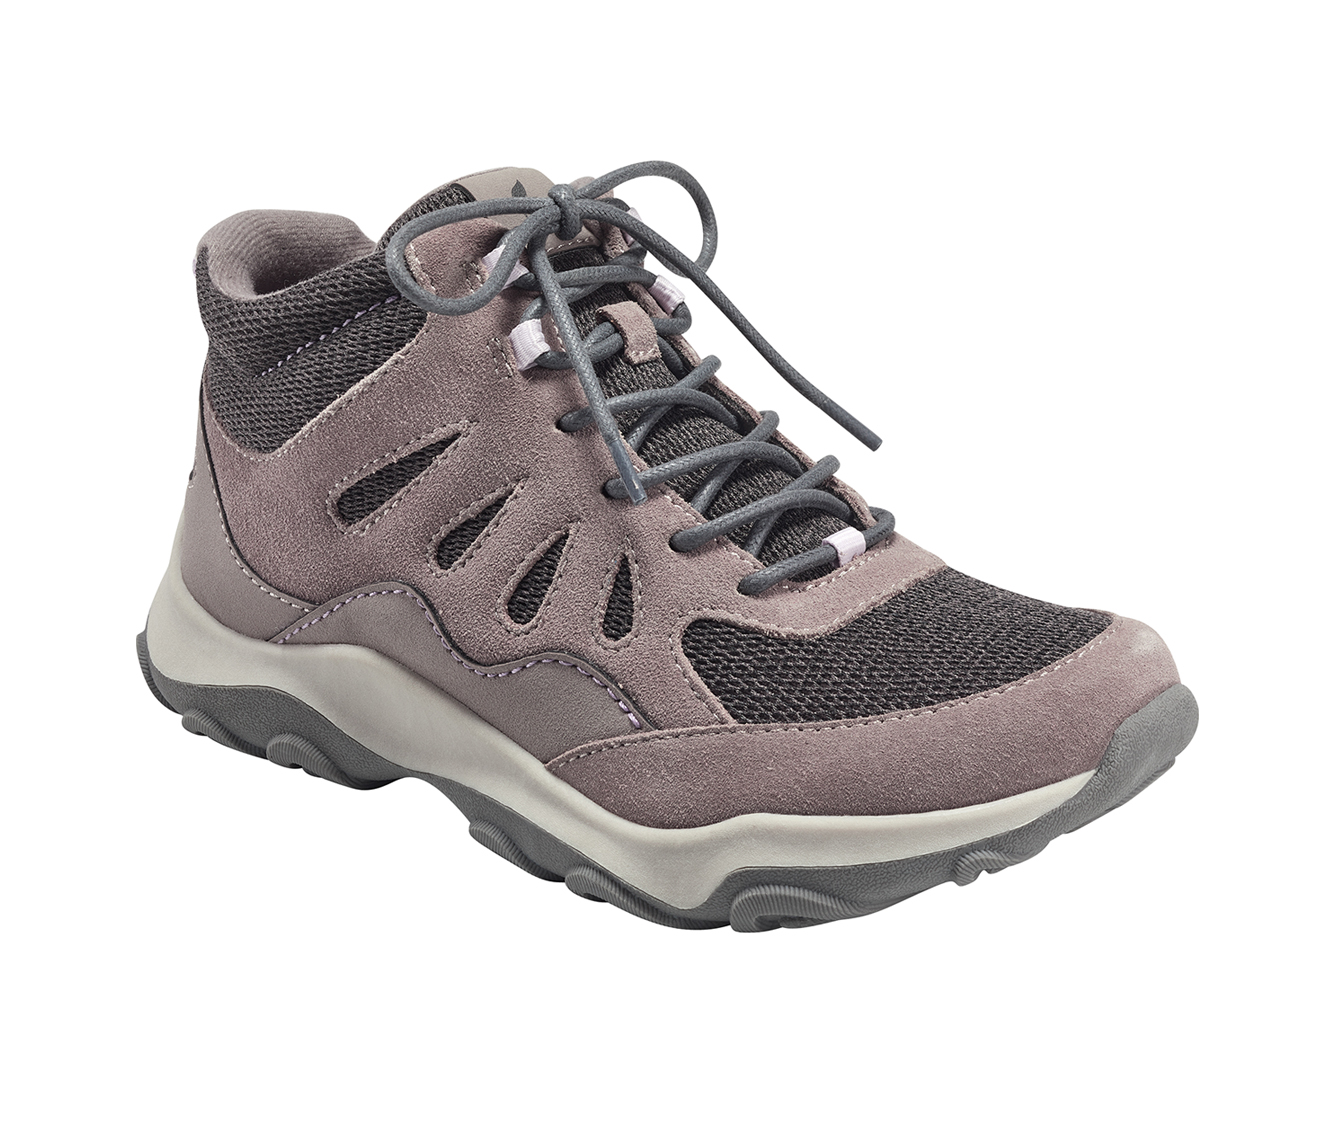 Women's Earth Origins Tristan Hiking Shoes in Thistle Wide Size 8.5